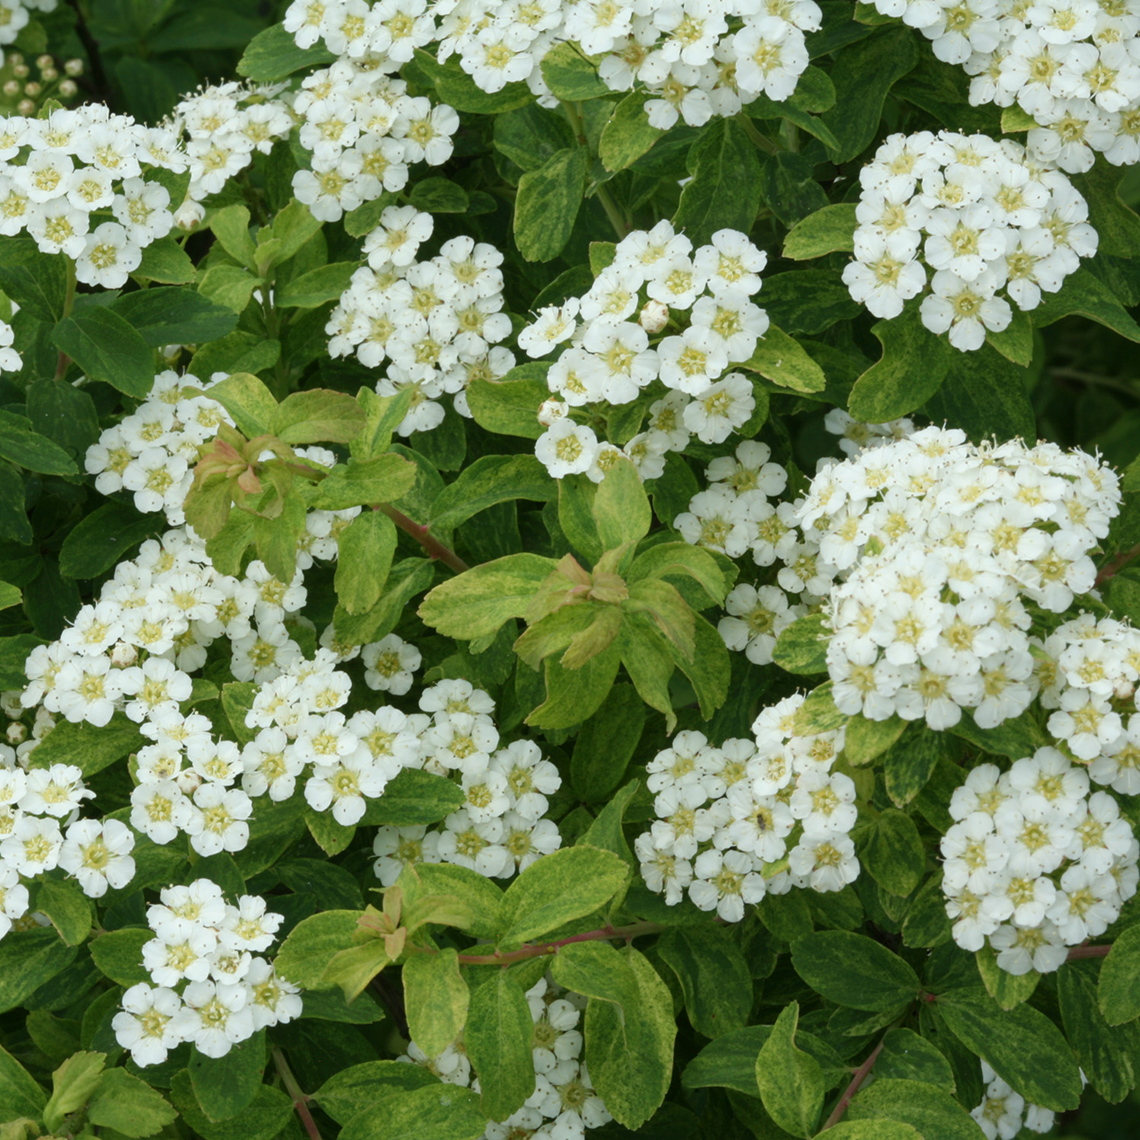 Close up of white flowering Golden Glitter Spiraea with variegated green foliage